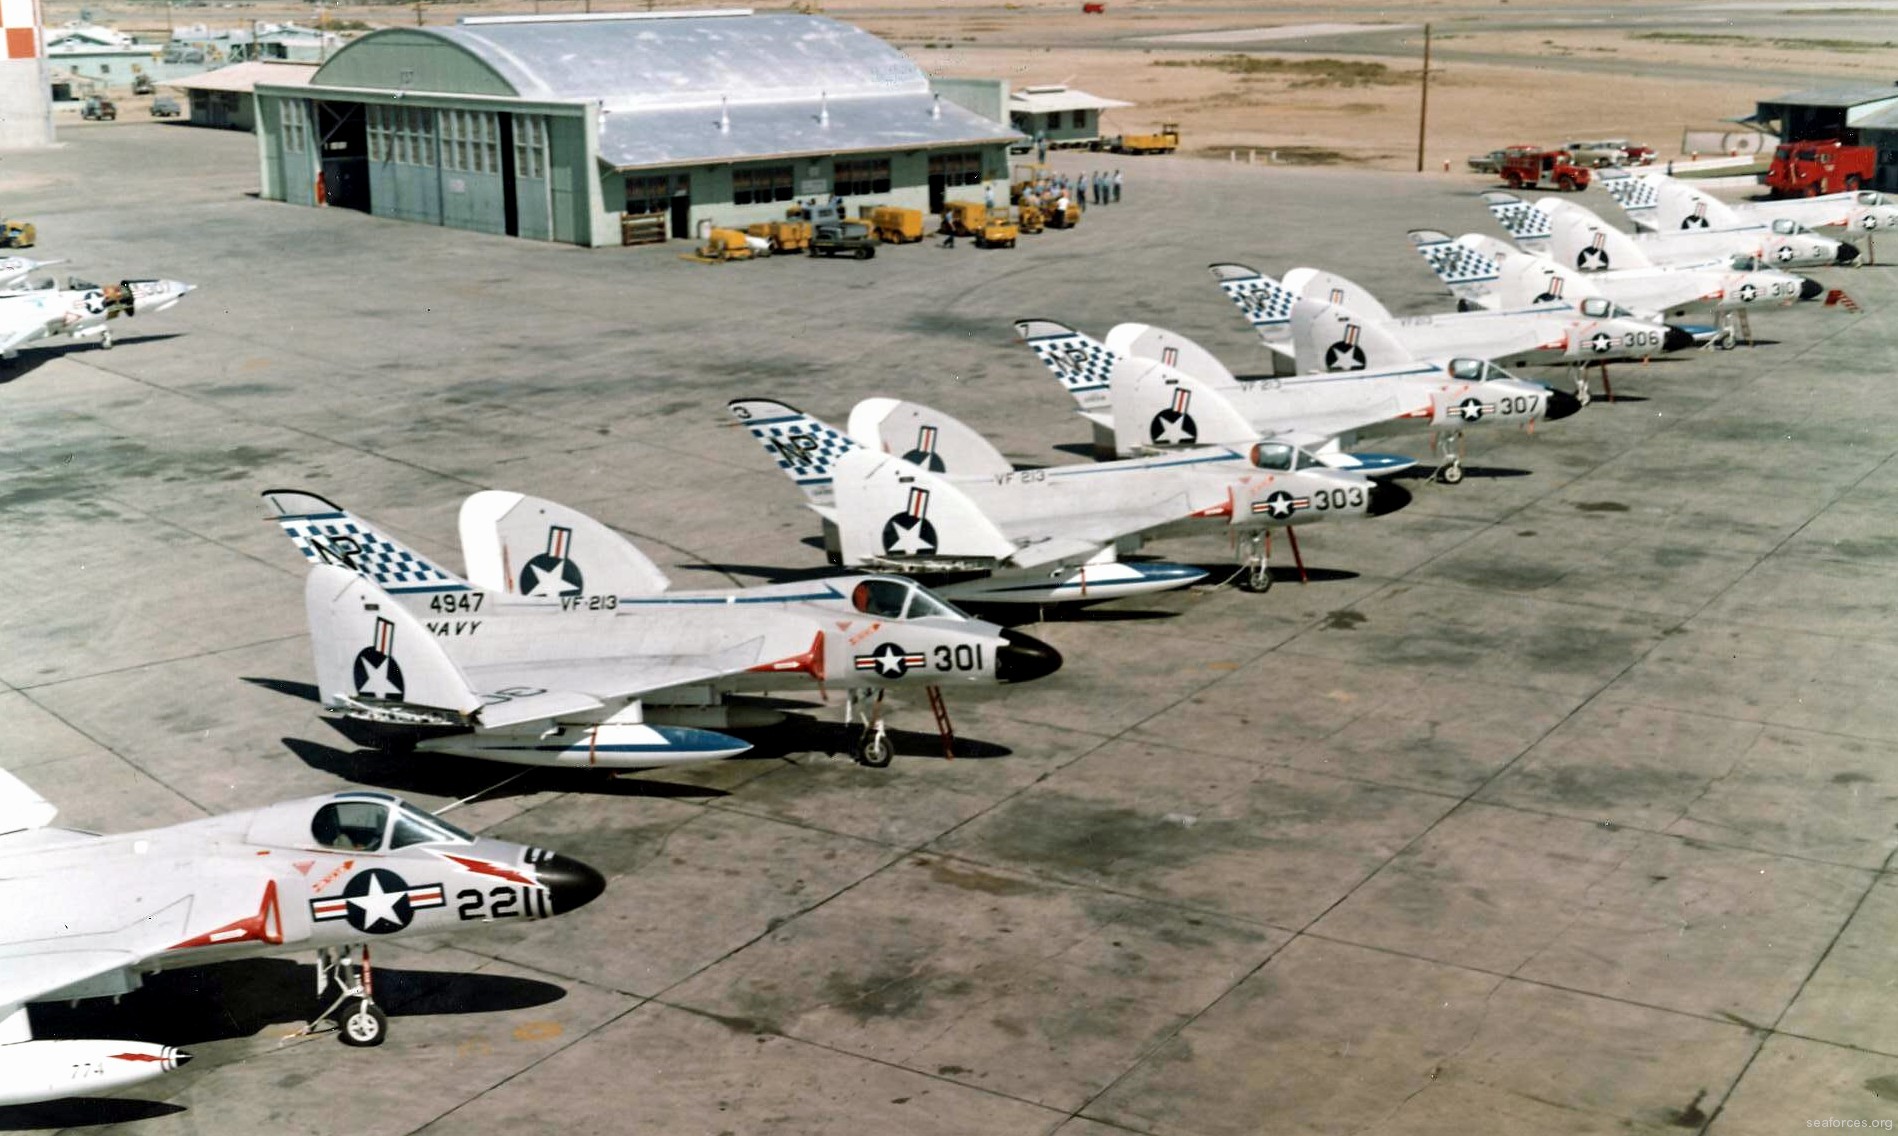 vf-213 black lions fighter squadron us navy f4d-1 skyray 103